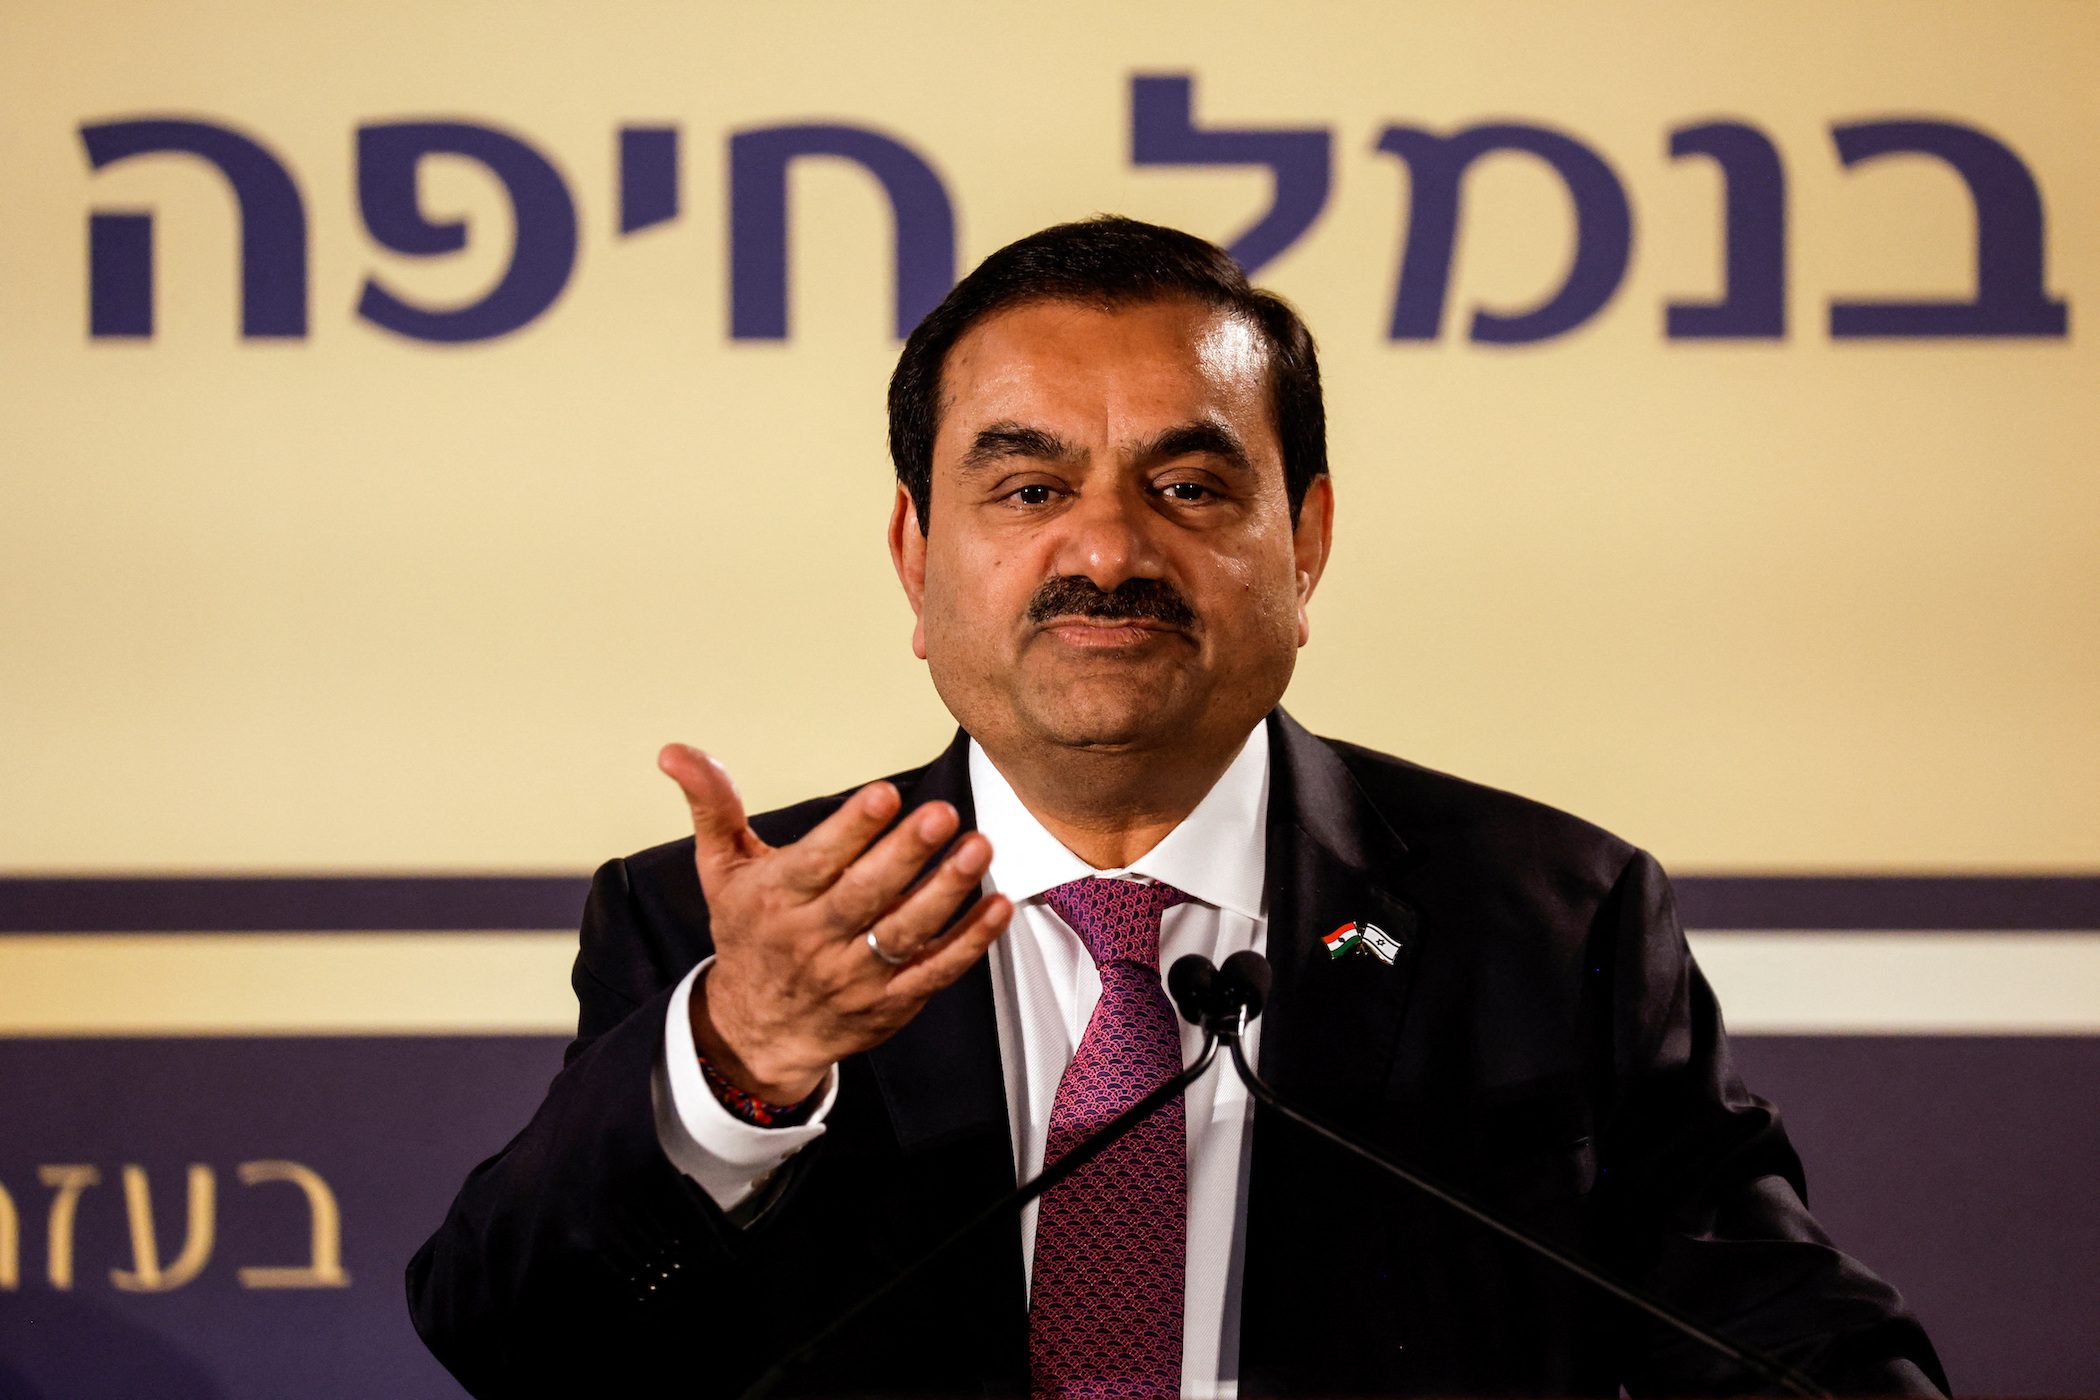 Adani loses Asia’s richest crown as stock wipeout reaches $86 billion